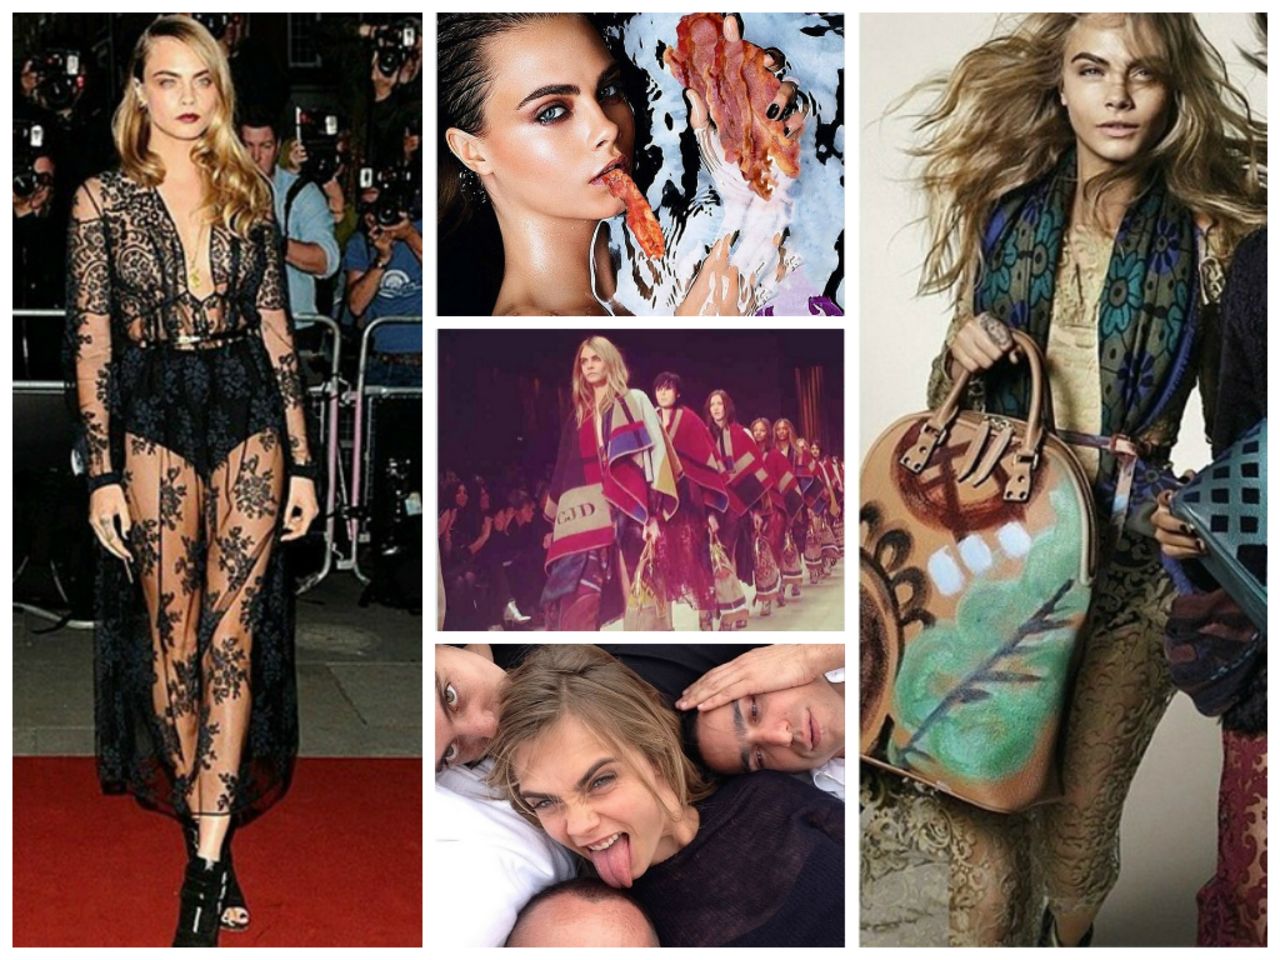 <strong>2. Cara Delevingne, Model</strong><br /><a href="http://instagram.com/caradelevingne" target="_blank" target="_blank"><strong>Instagram</strong></a><strong> followers:</strong> 6,769,595<br /><a href="https://twitter.com/Caradelevingne" target="_blank" target="_blank"><strong>Twitter</strong></a><strong> followers: </strong>1,830,000<br /><strong>Credits:</strong> Dolce and Gabbana, Oscar de la Renta, Burberr<br /><strong>Posts: </strong>Cross-eyed smiles, red carpet looks and bacon, lots and lots of bacon. 